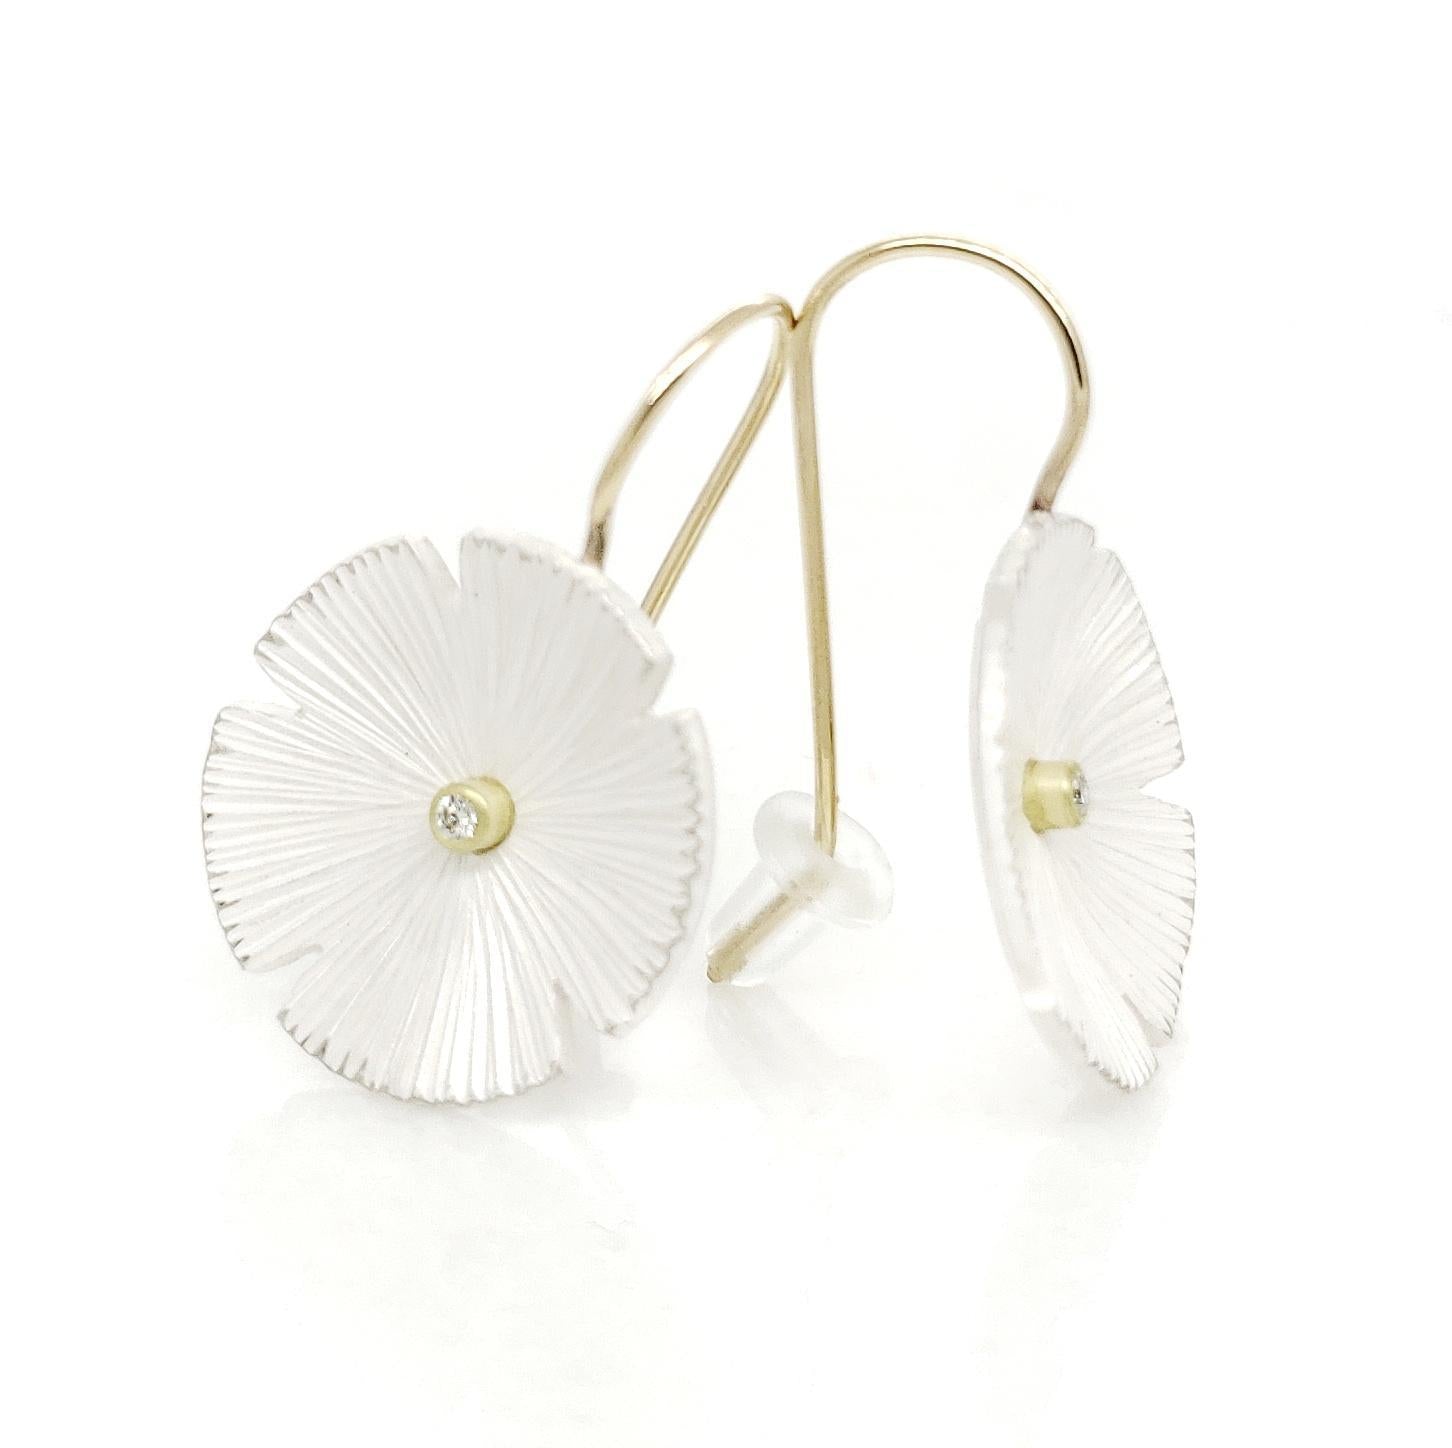 Earrings – Lily Pad Drops in White by Susan Mahlstedt